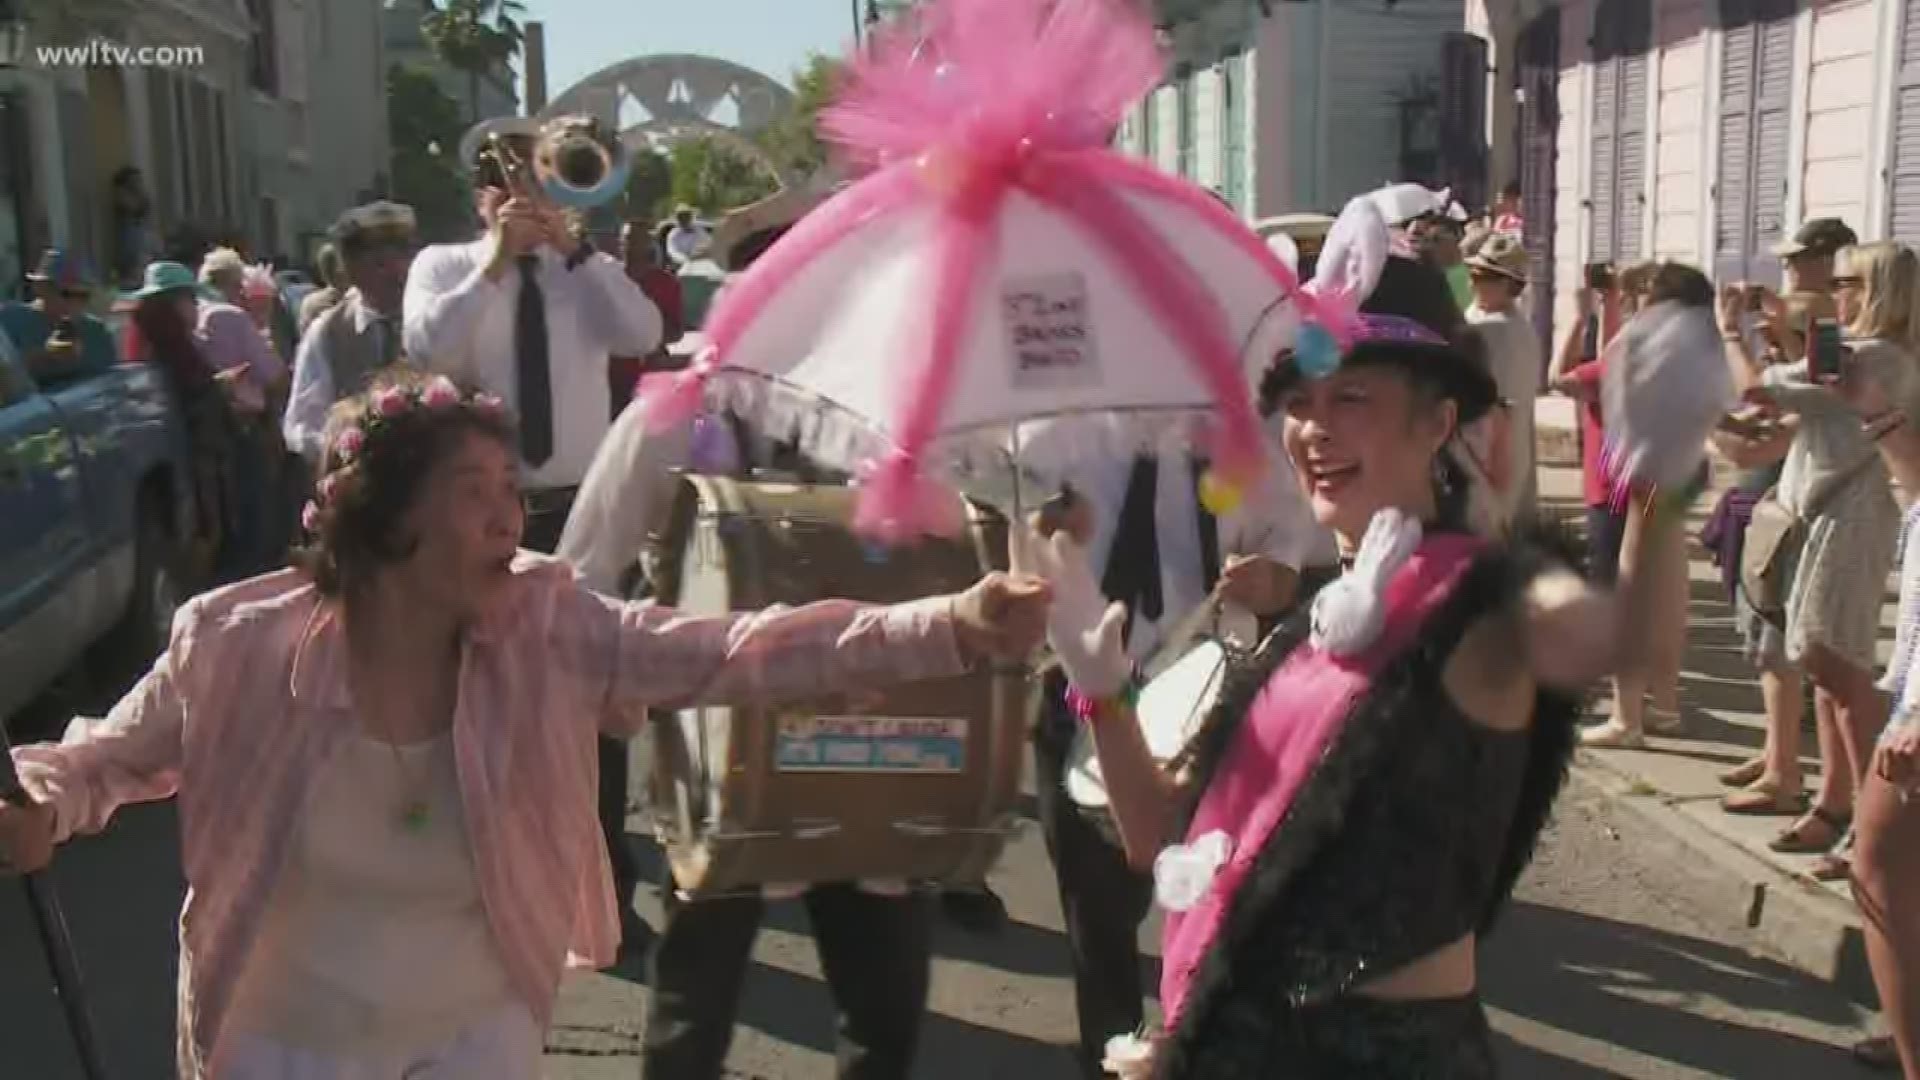 This is the 20th year the parade has rolled through the French Quarter.